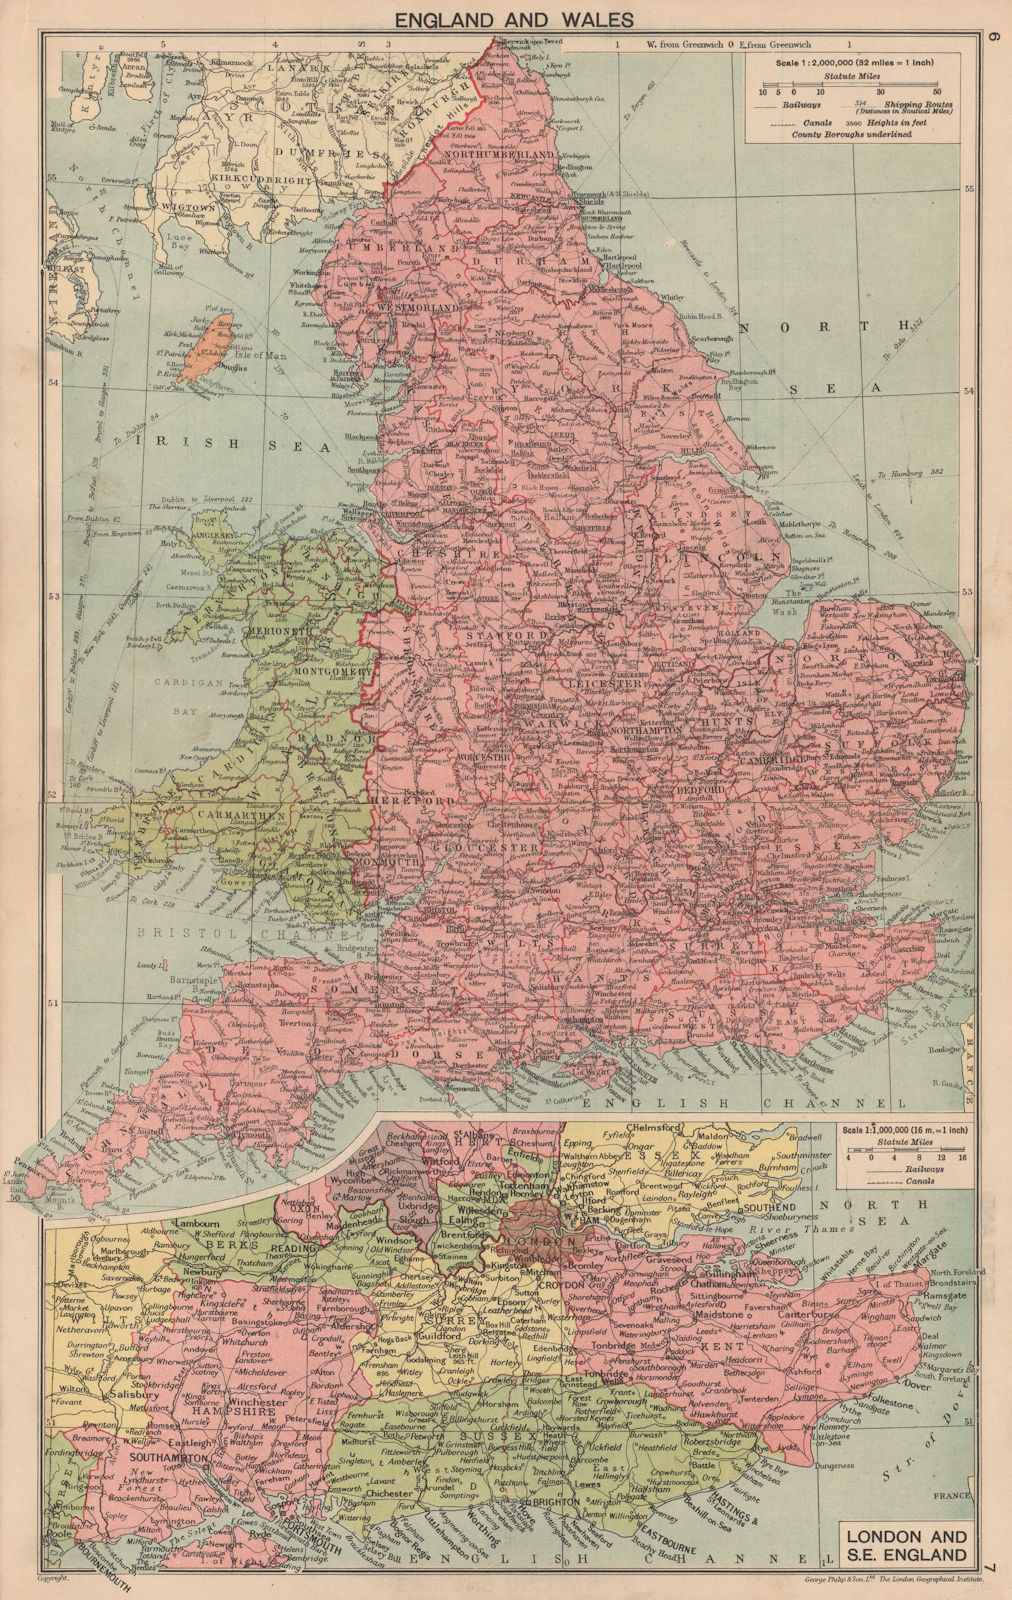 Associate Product SECOND WORLD WAR. England & Wales in 1940. South East England 1940 old map